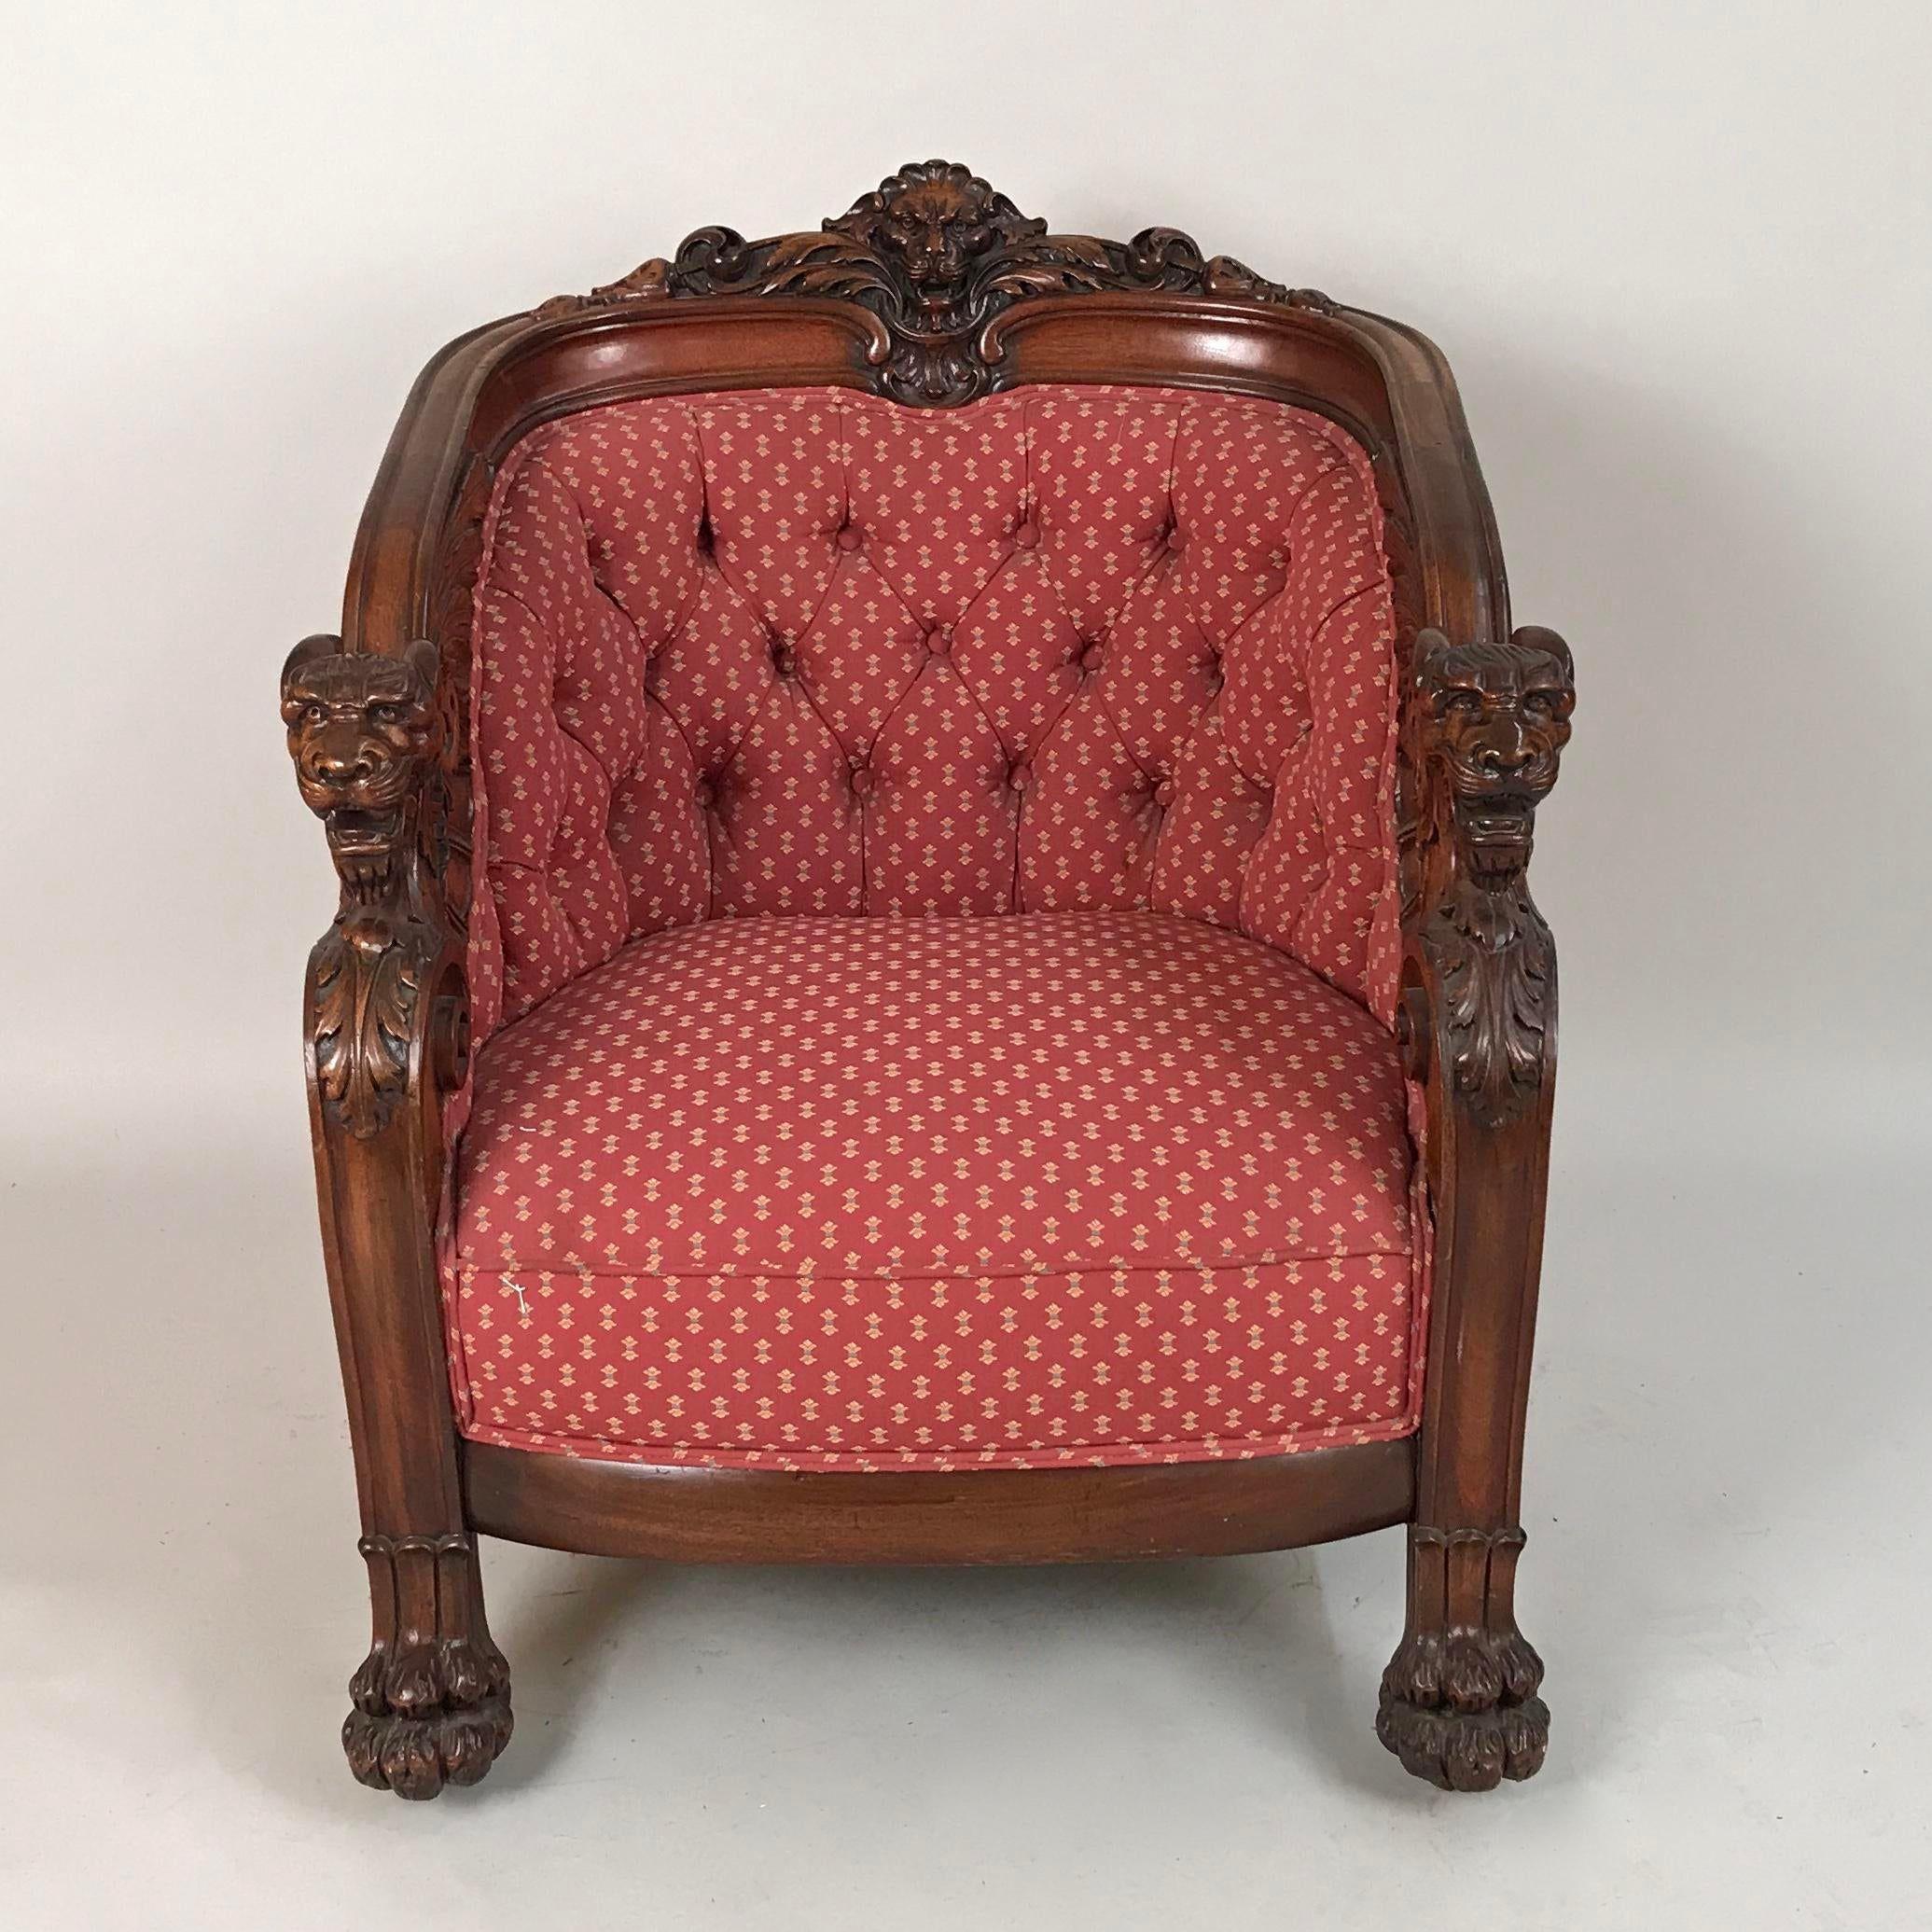 arly 19th Century English Regency mahogany armchair in the Manner of George Smith (Born in 1786). George Smith was a celebrated furniture designer during the Regency Period. His designs and exceptional craftsmanship still influence the brand today!